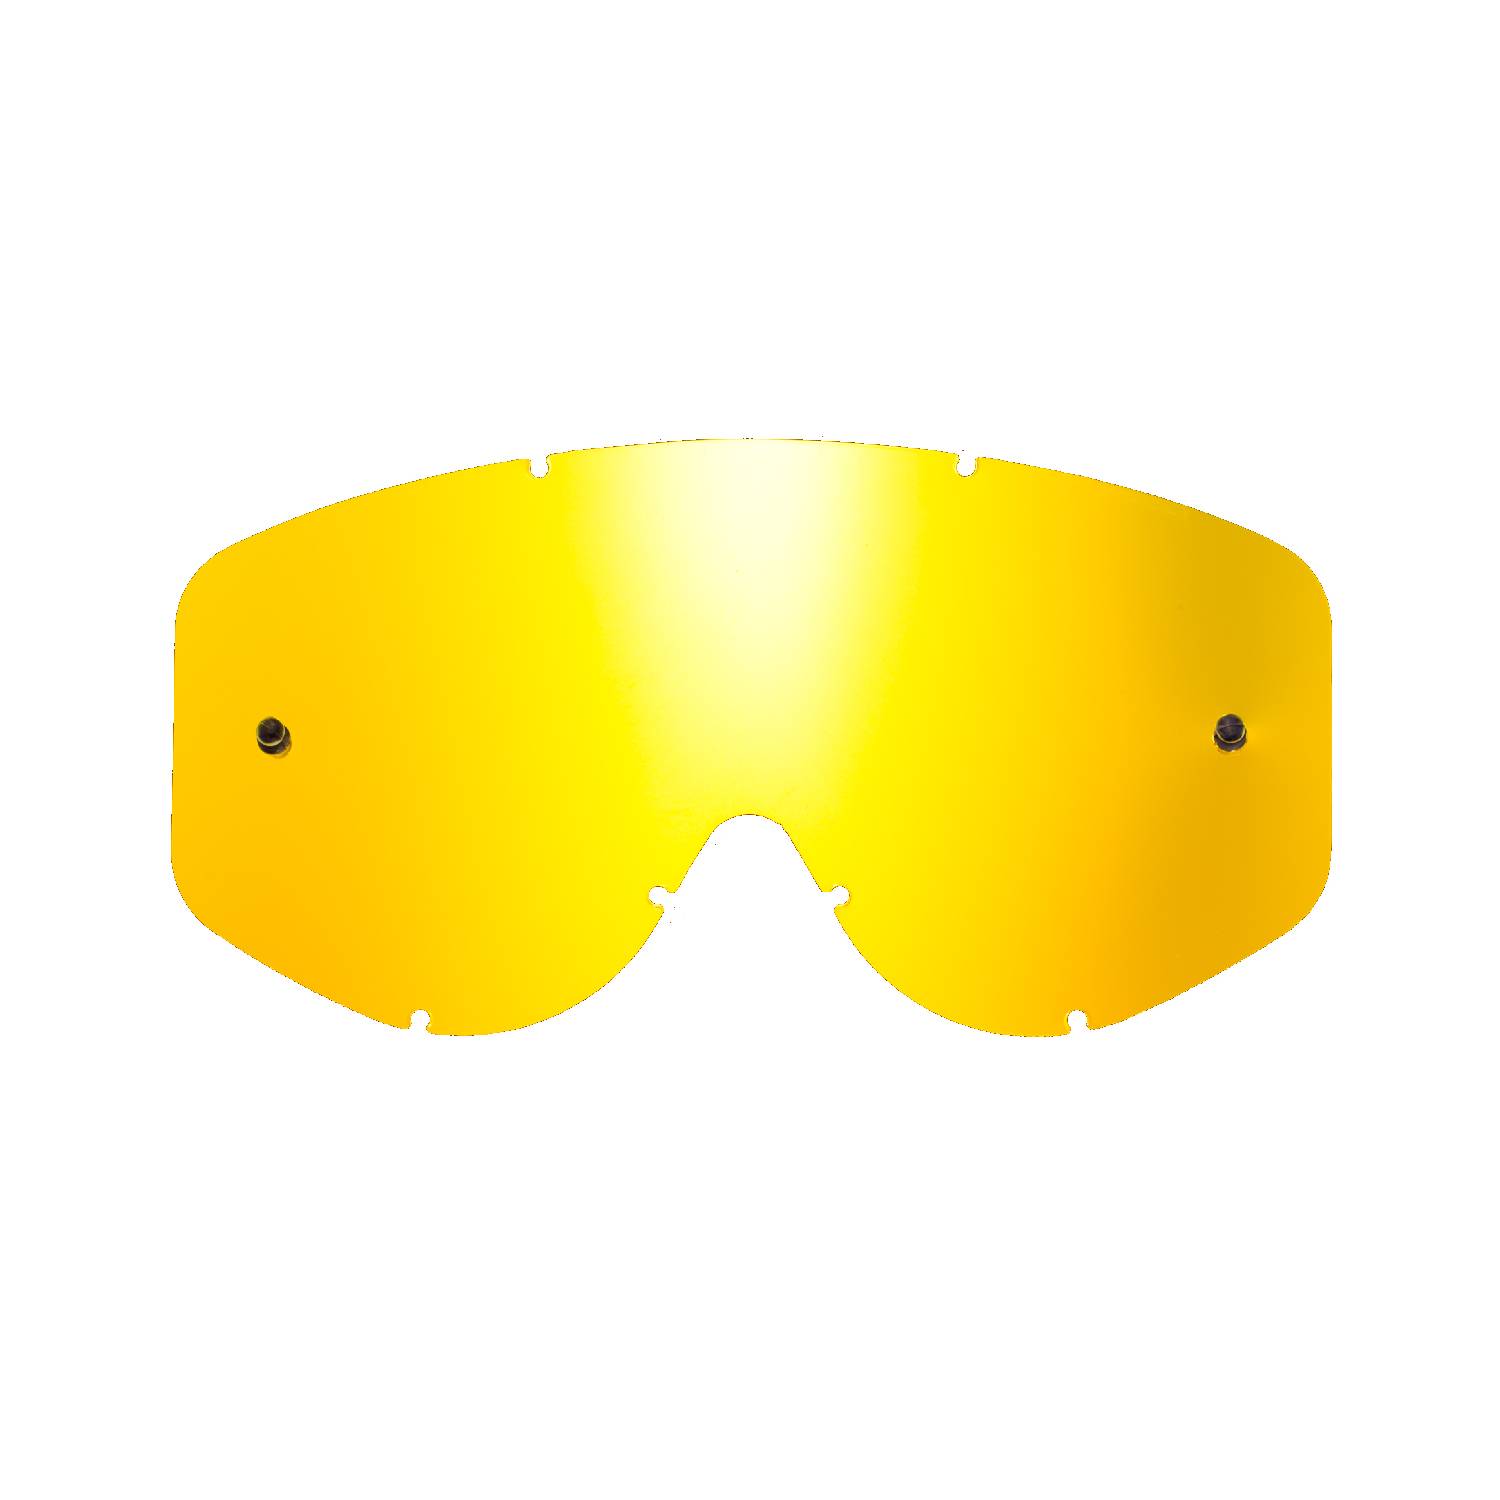 gold-toned mirrored replacement lenses for goggles compatible for Scott 83/89 / Recoil / 89 Xi goggle